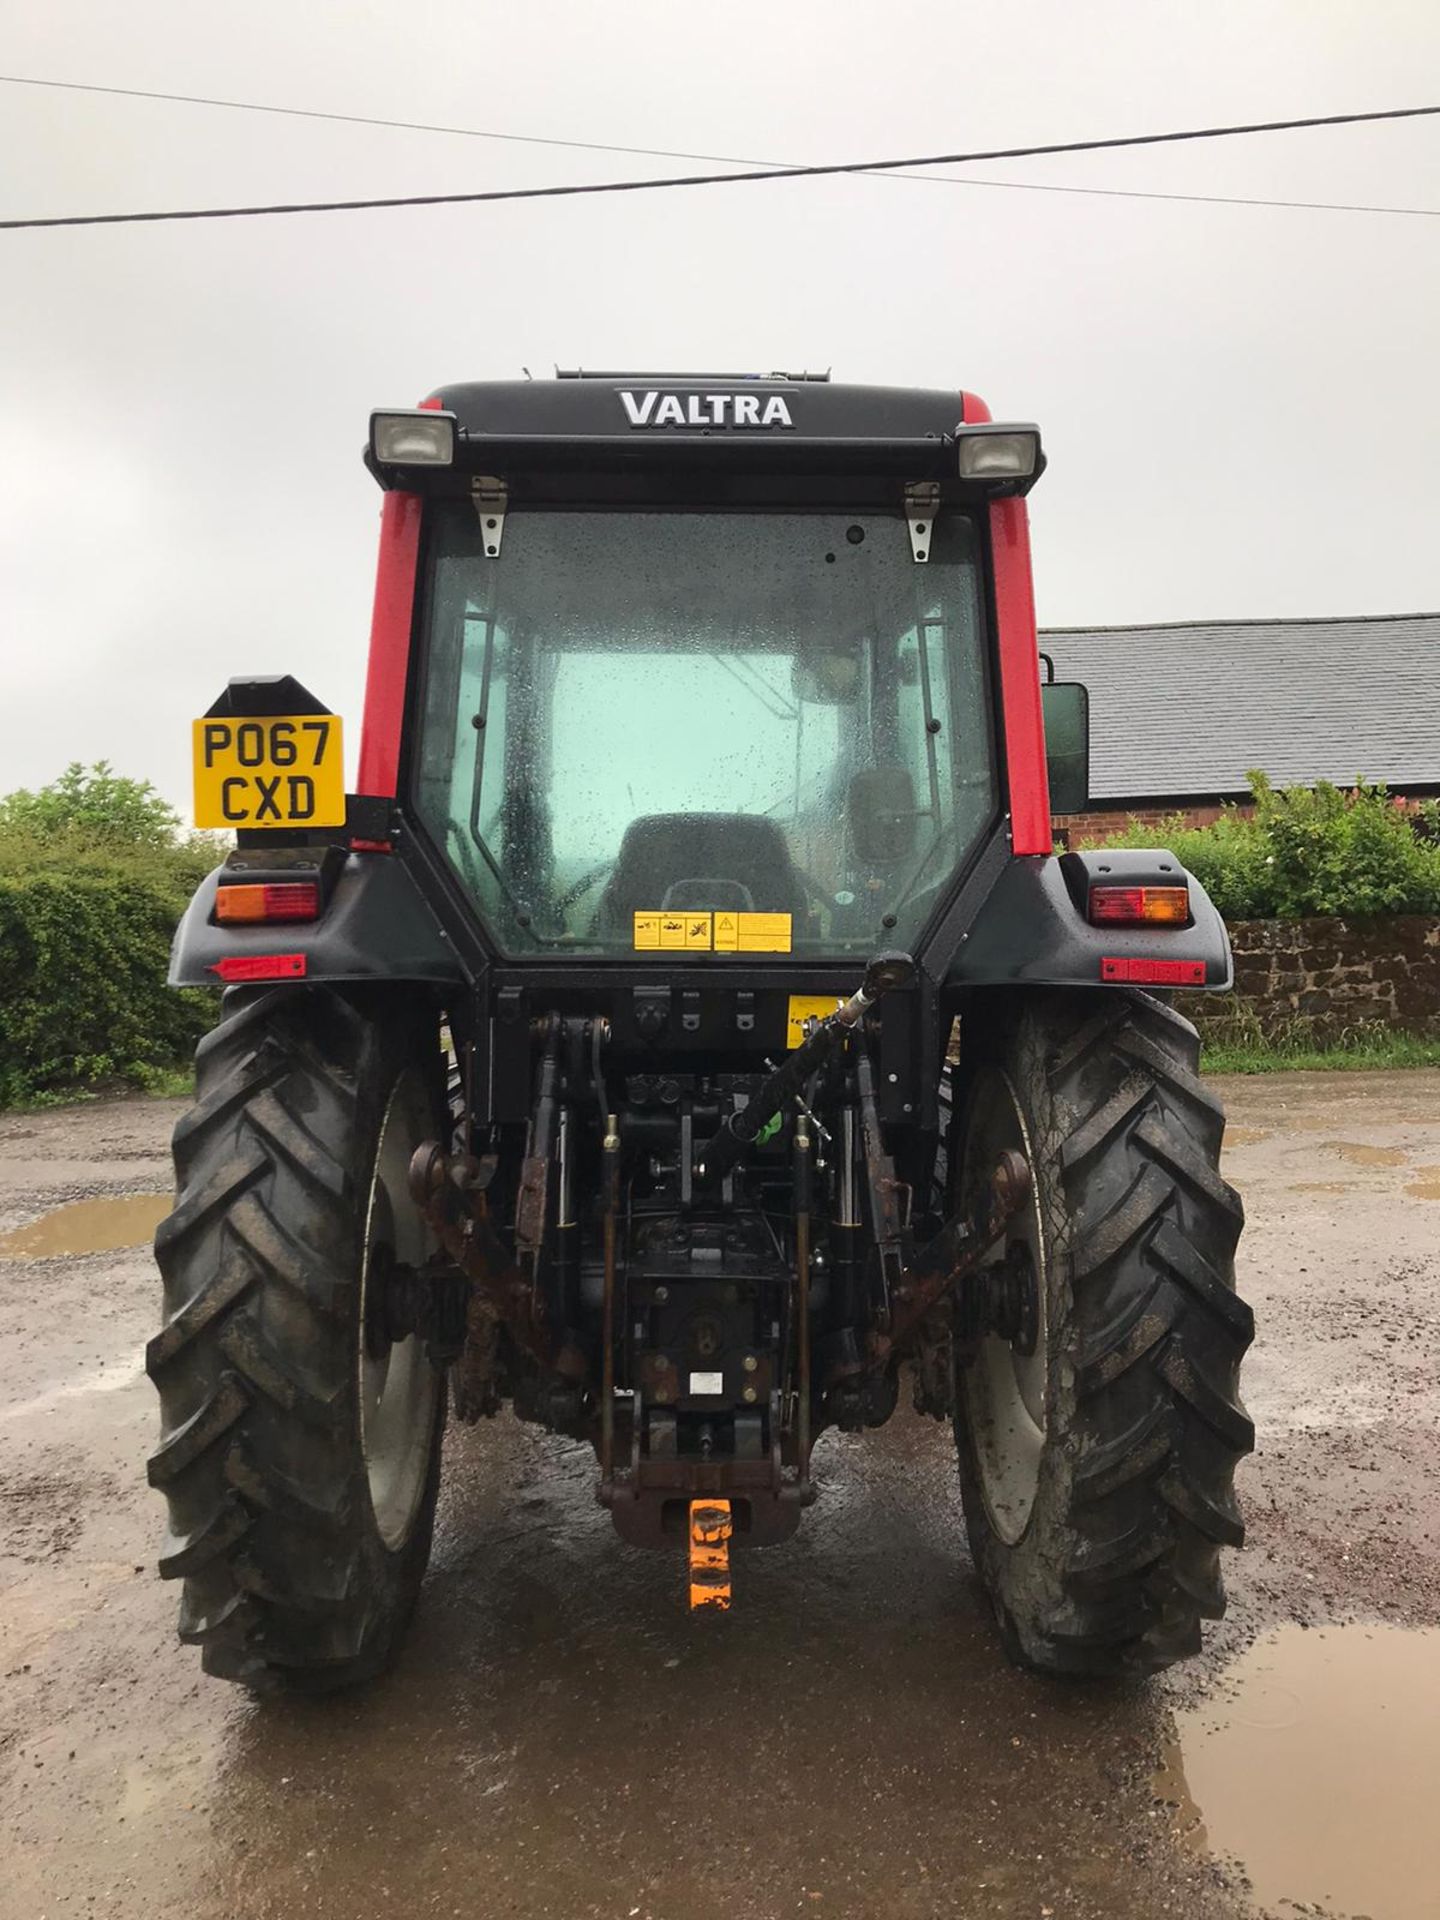 2017/67 REG VALTRA A73 TRACTOR WITH LOADER, RUNS, DRIVES AND LIFTS, SHOWING 550 HOURS *PLUS VAT* - Image 2 of 5